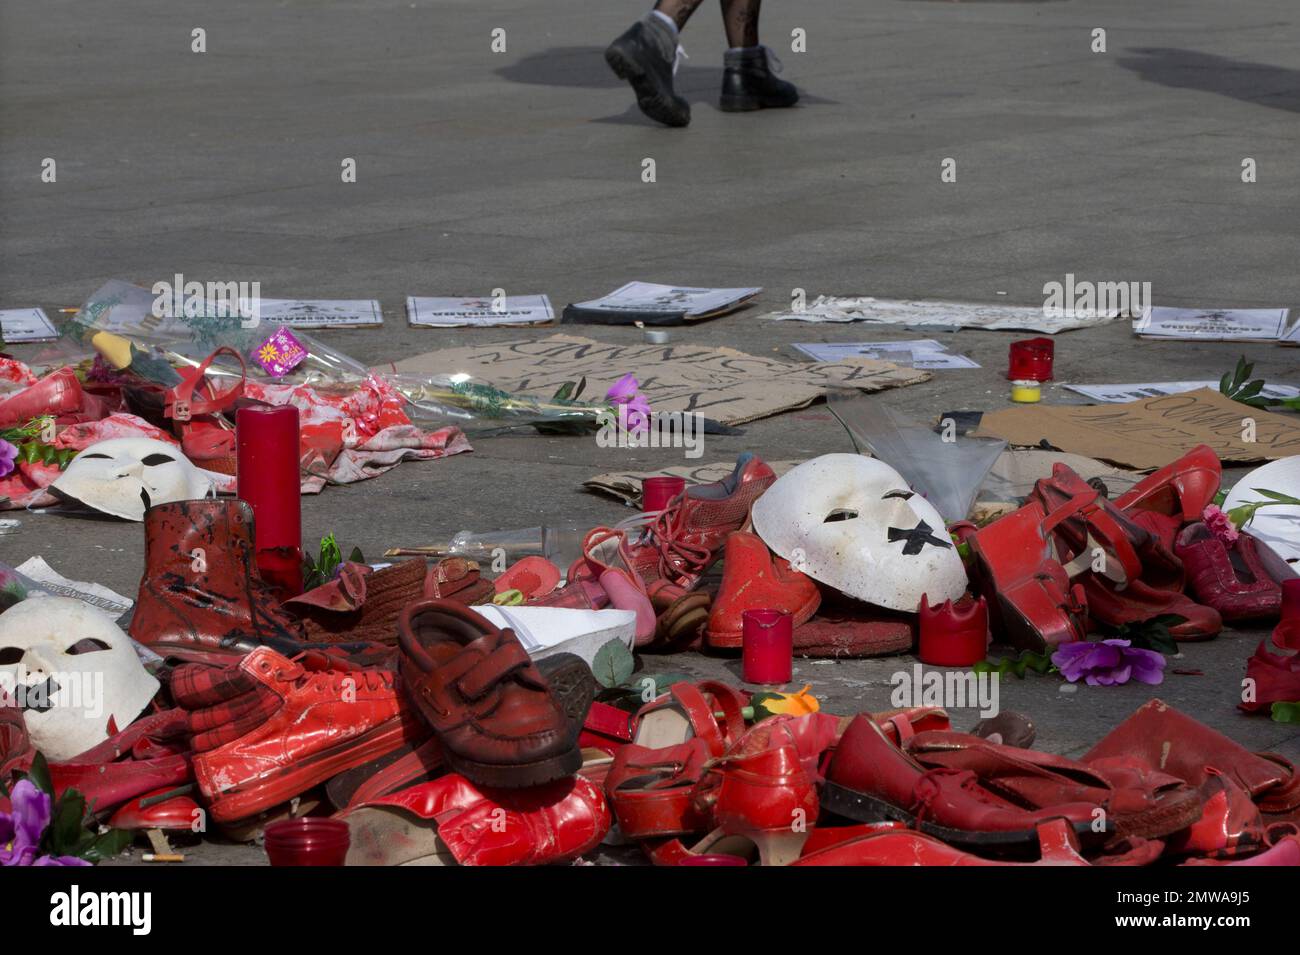 Red shoes, candles, flowers and masks placed by members of women's group  lie on the ground in Puerta del Sol square on the eve of International  Women's Day in Madrid, Spain, Tuesday,